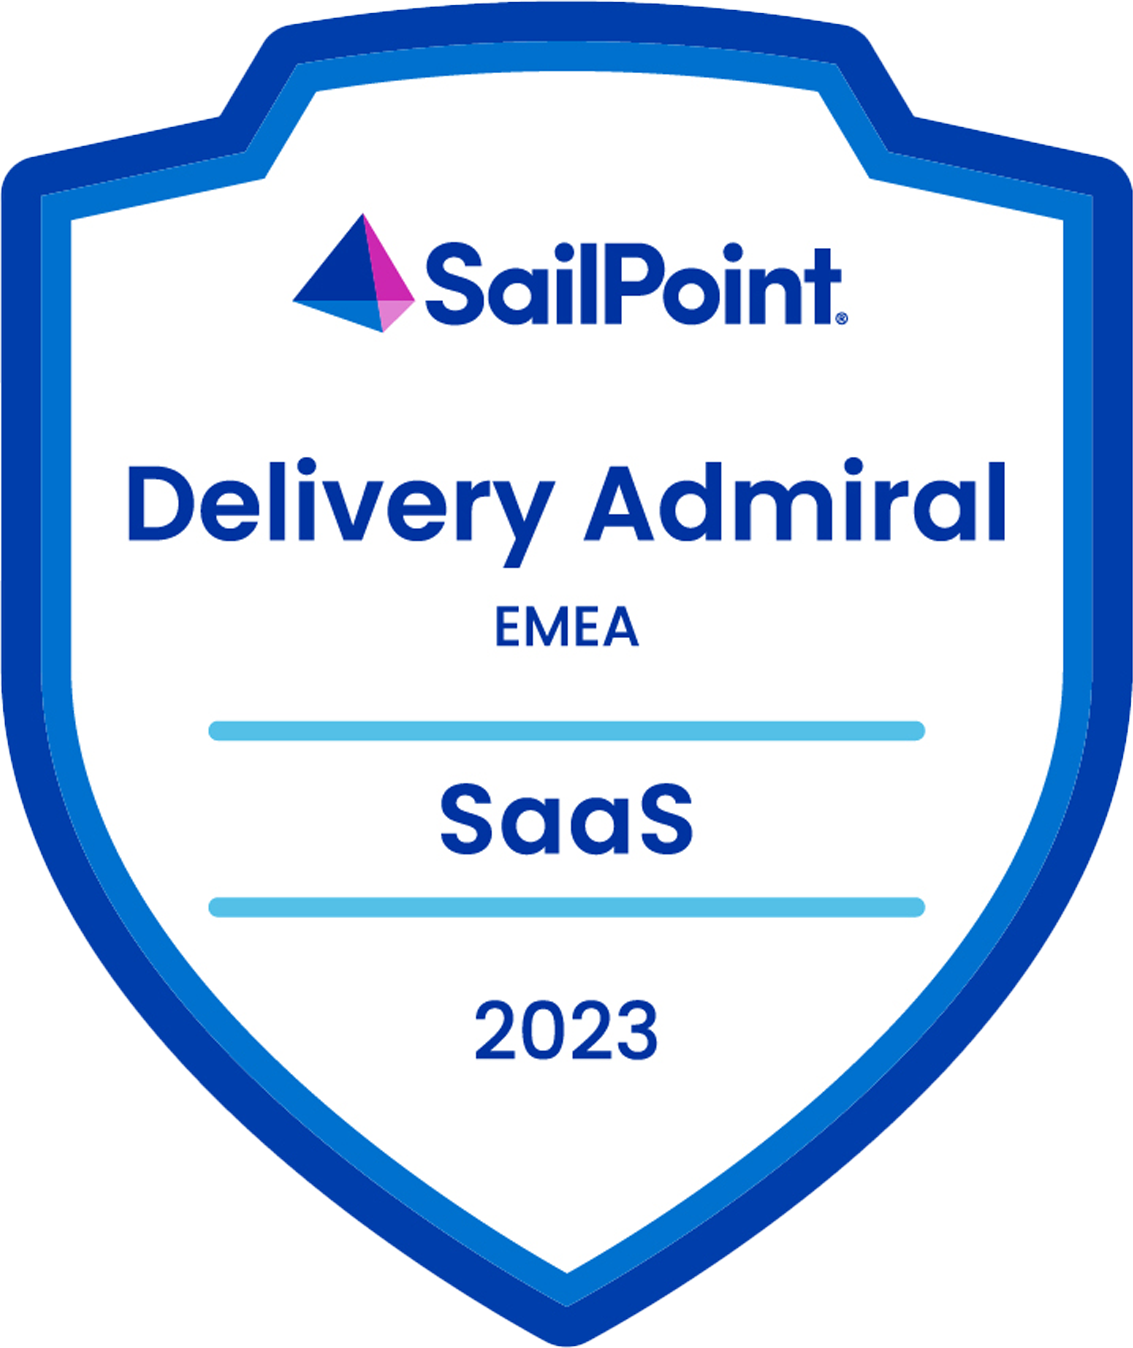 Grabowsky Delivery SaaS Admiral 2023